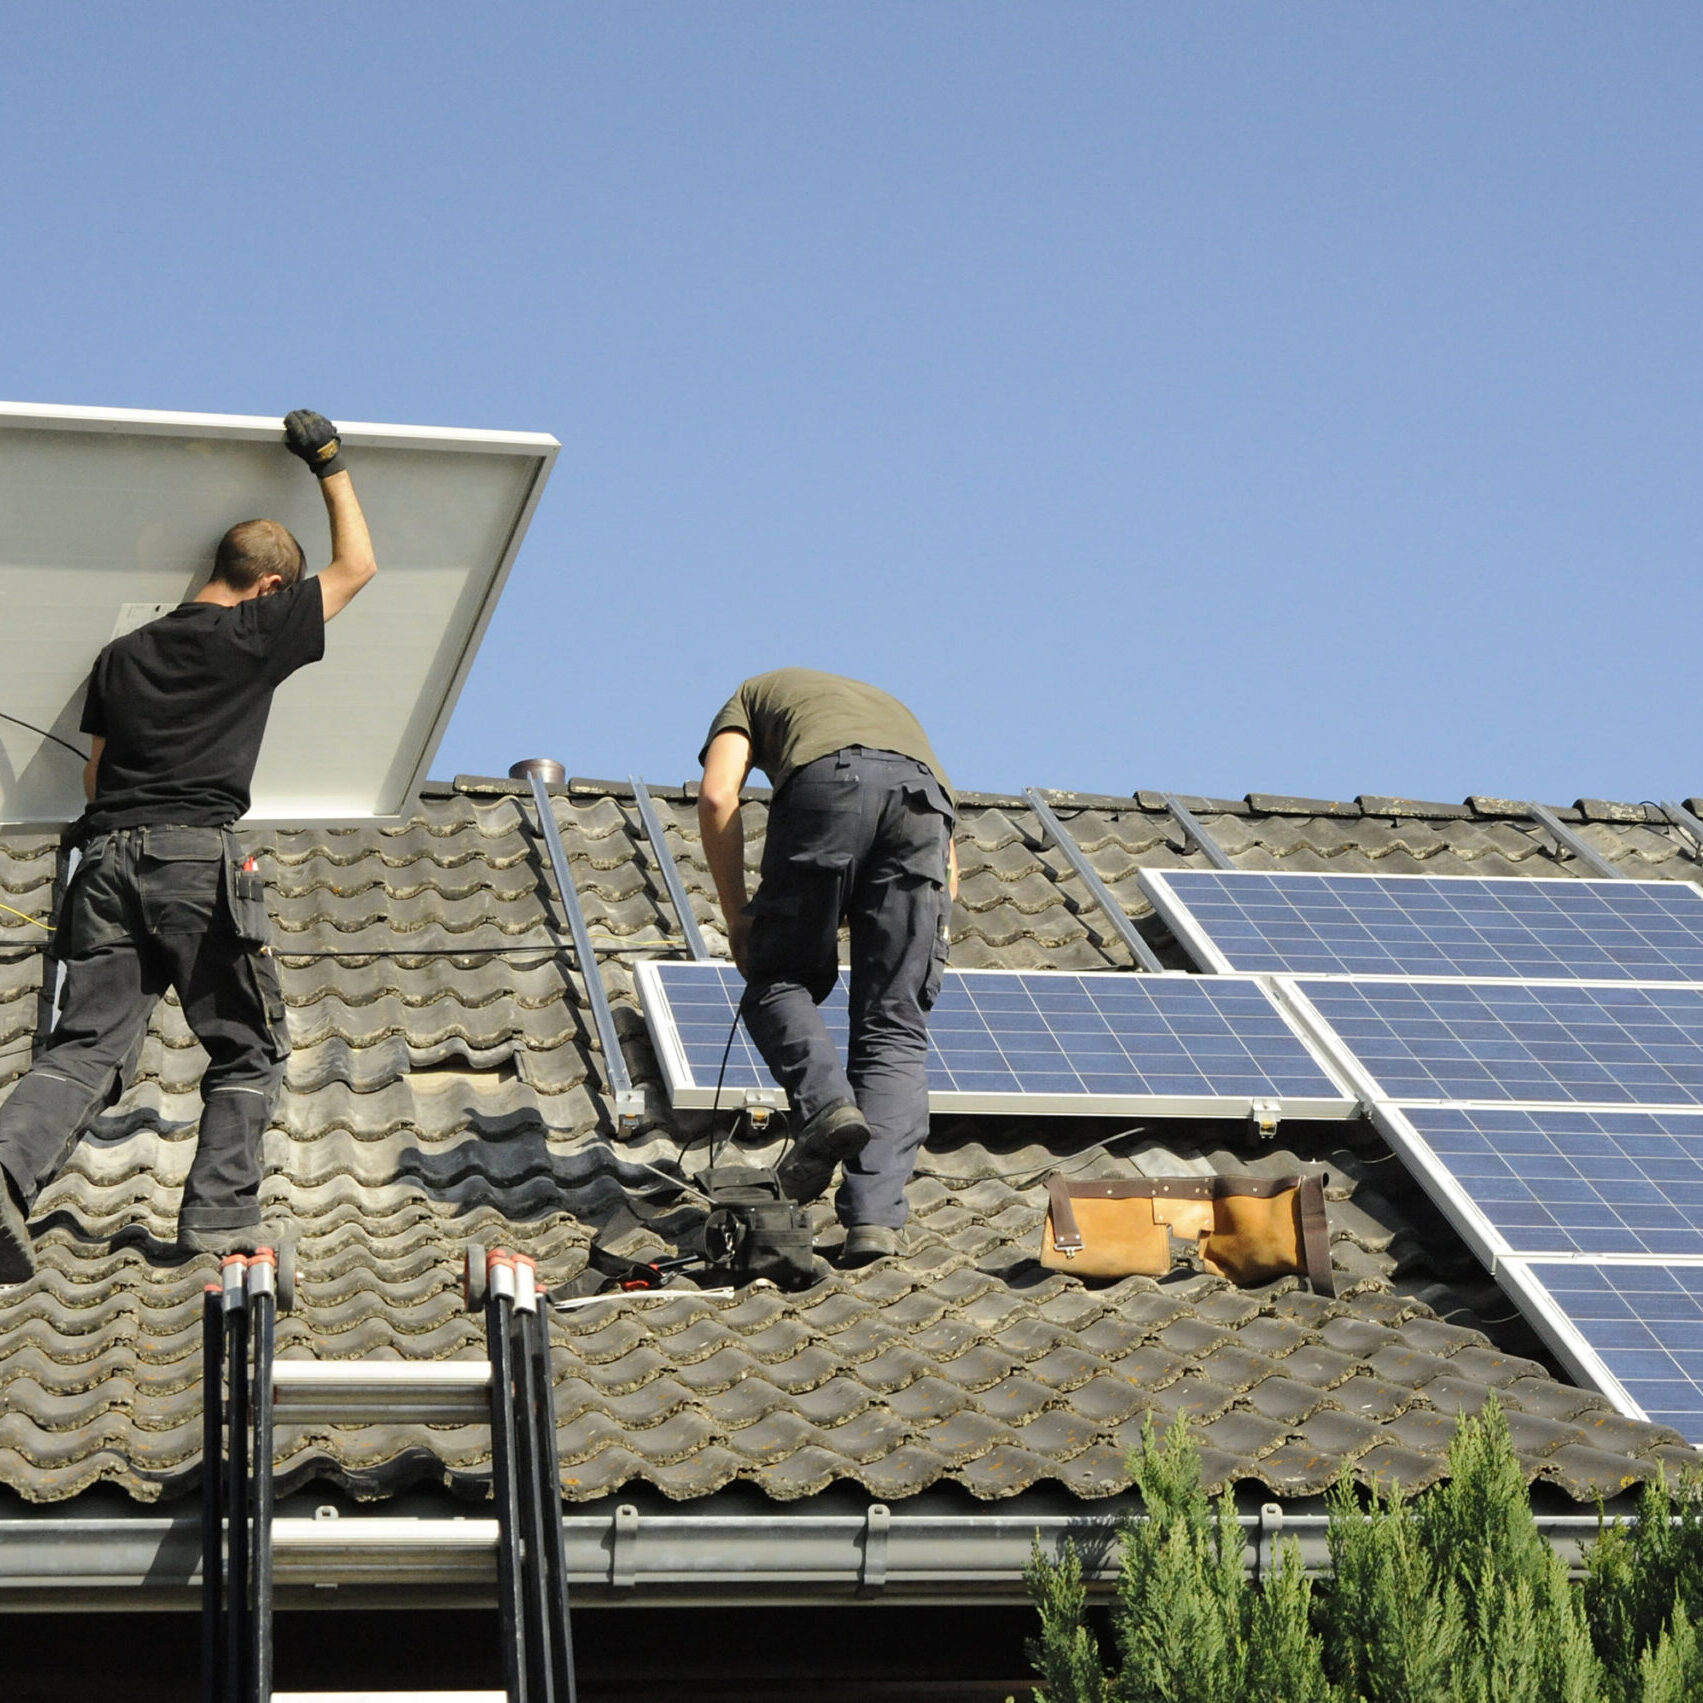 Workers installing a solar system